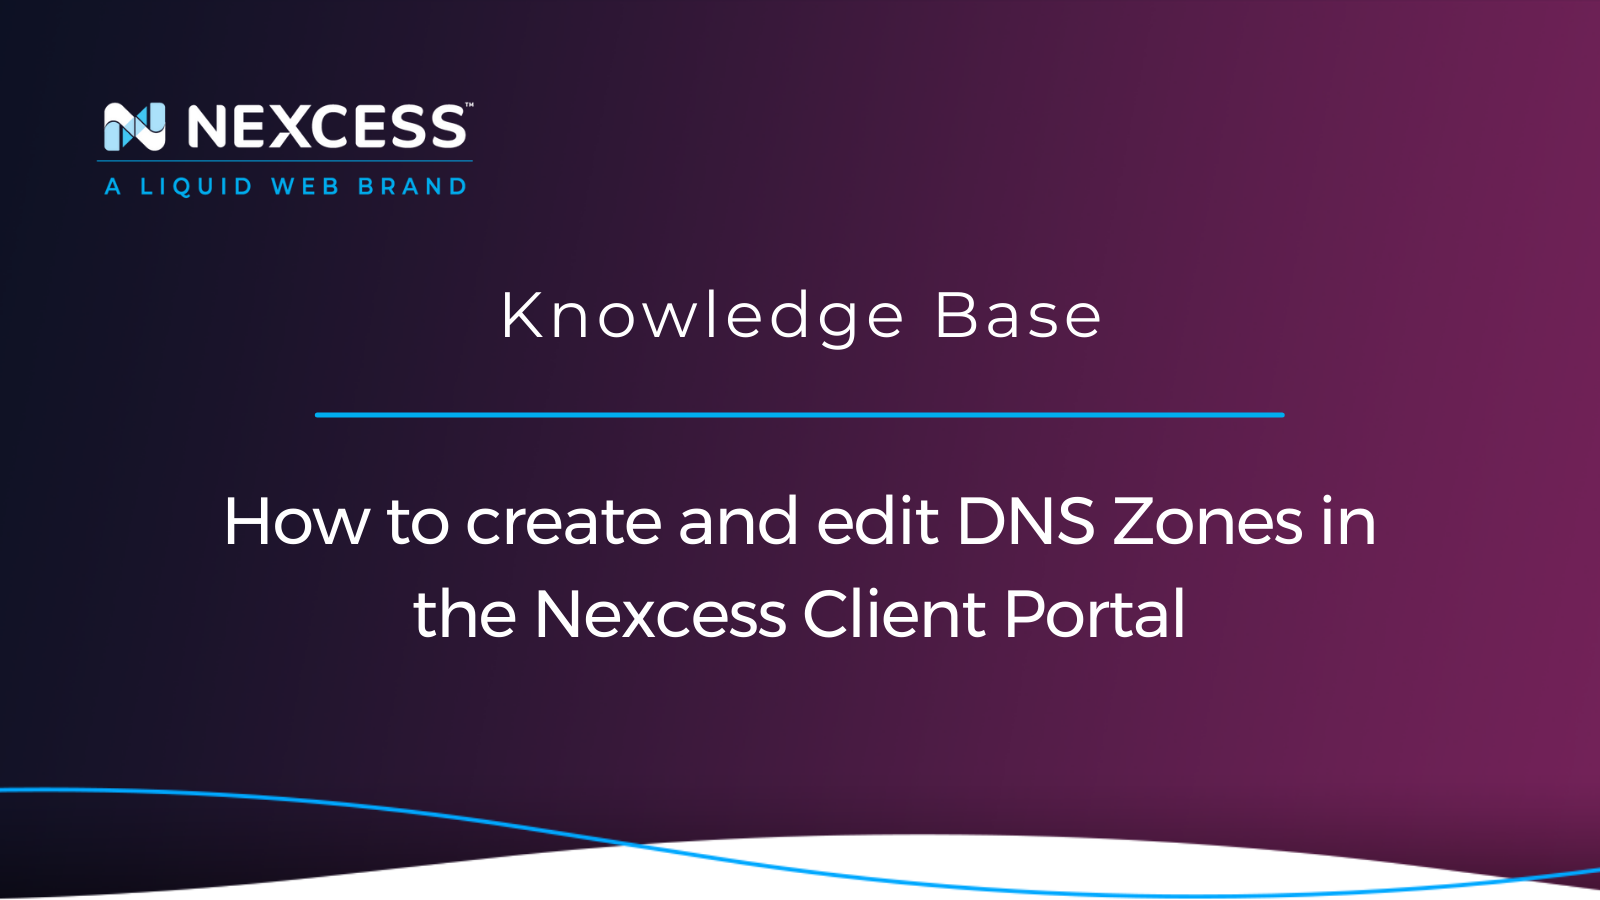 How to create and edit DNS Zones in the Nexcess Client Portal